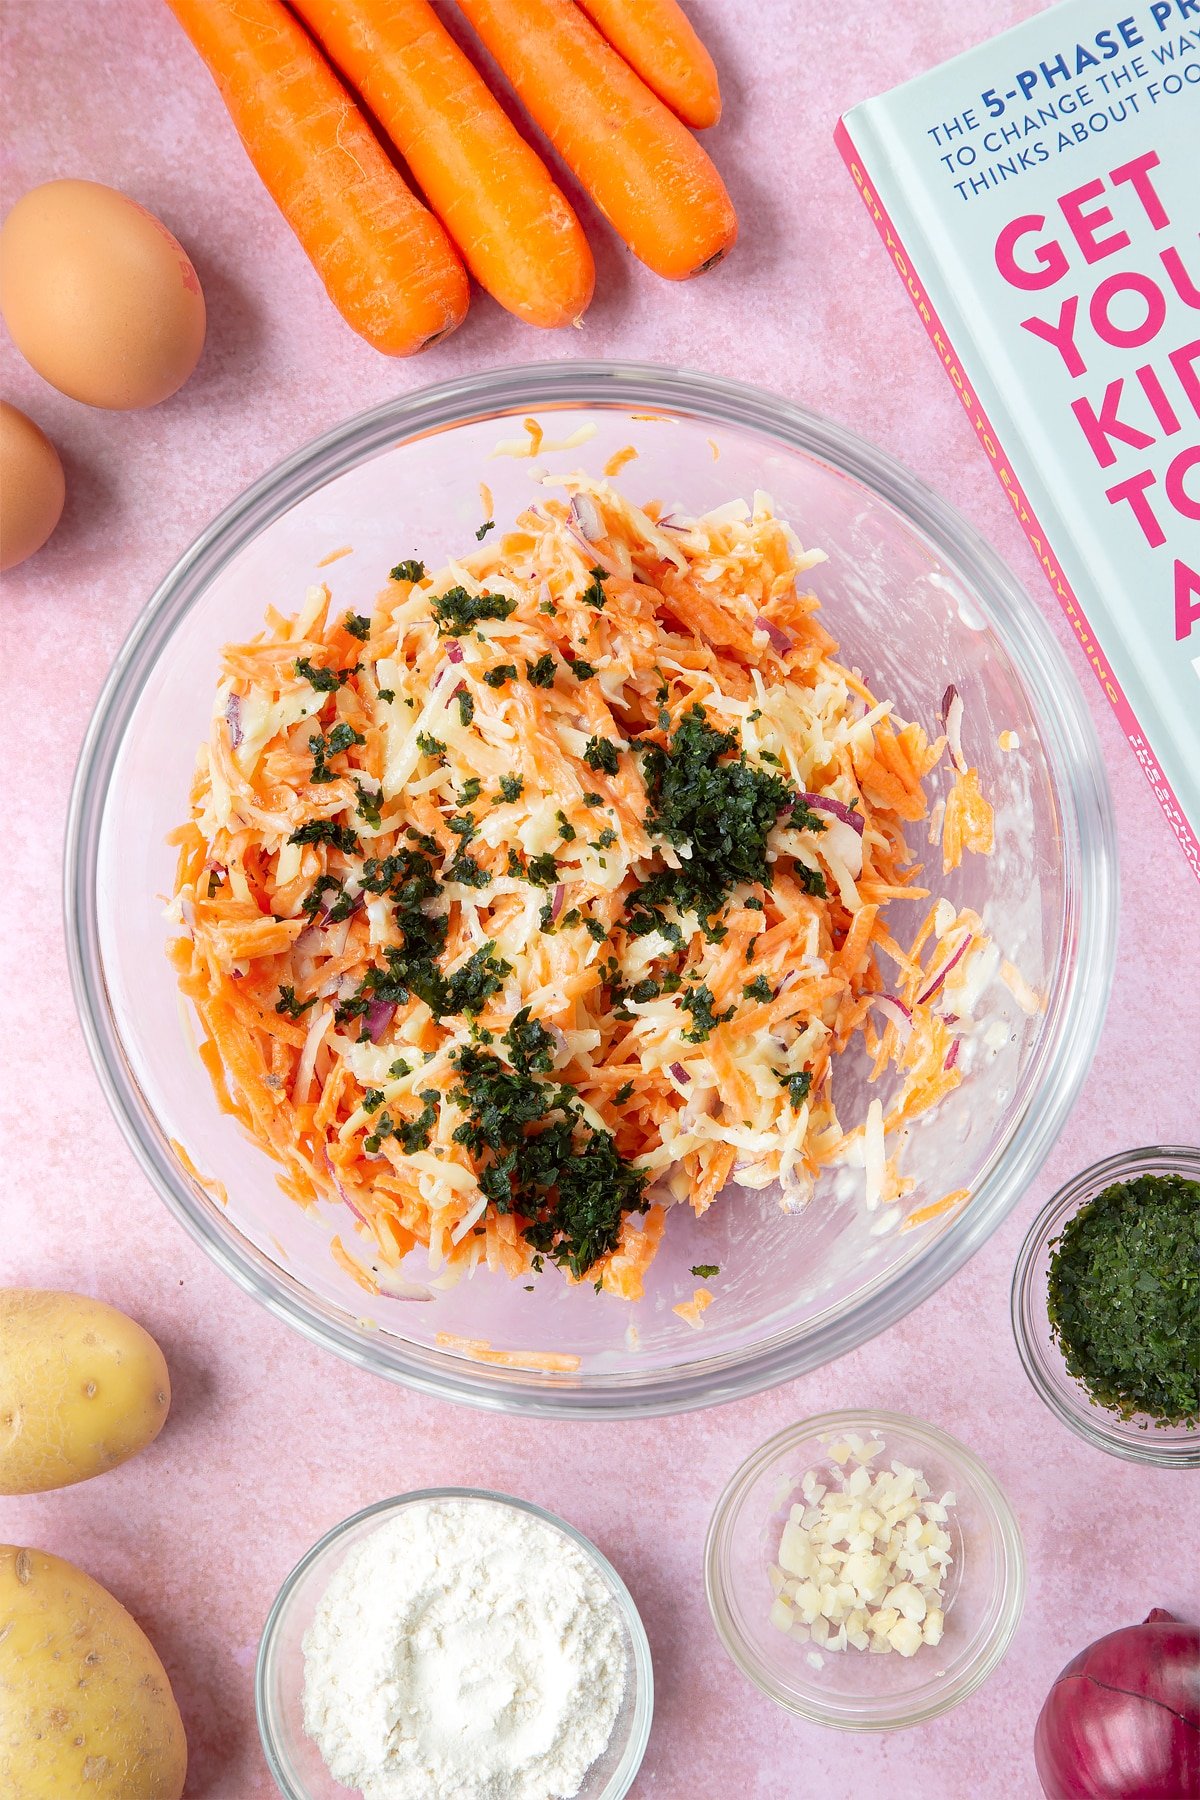 Grated carrot, potato and red onion in a batter, topped with chopped coriander in a mixing bowl. The bowl is surrounded by ingredients to make carrot patties.